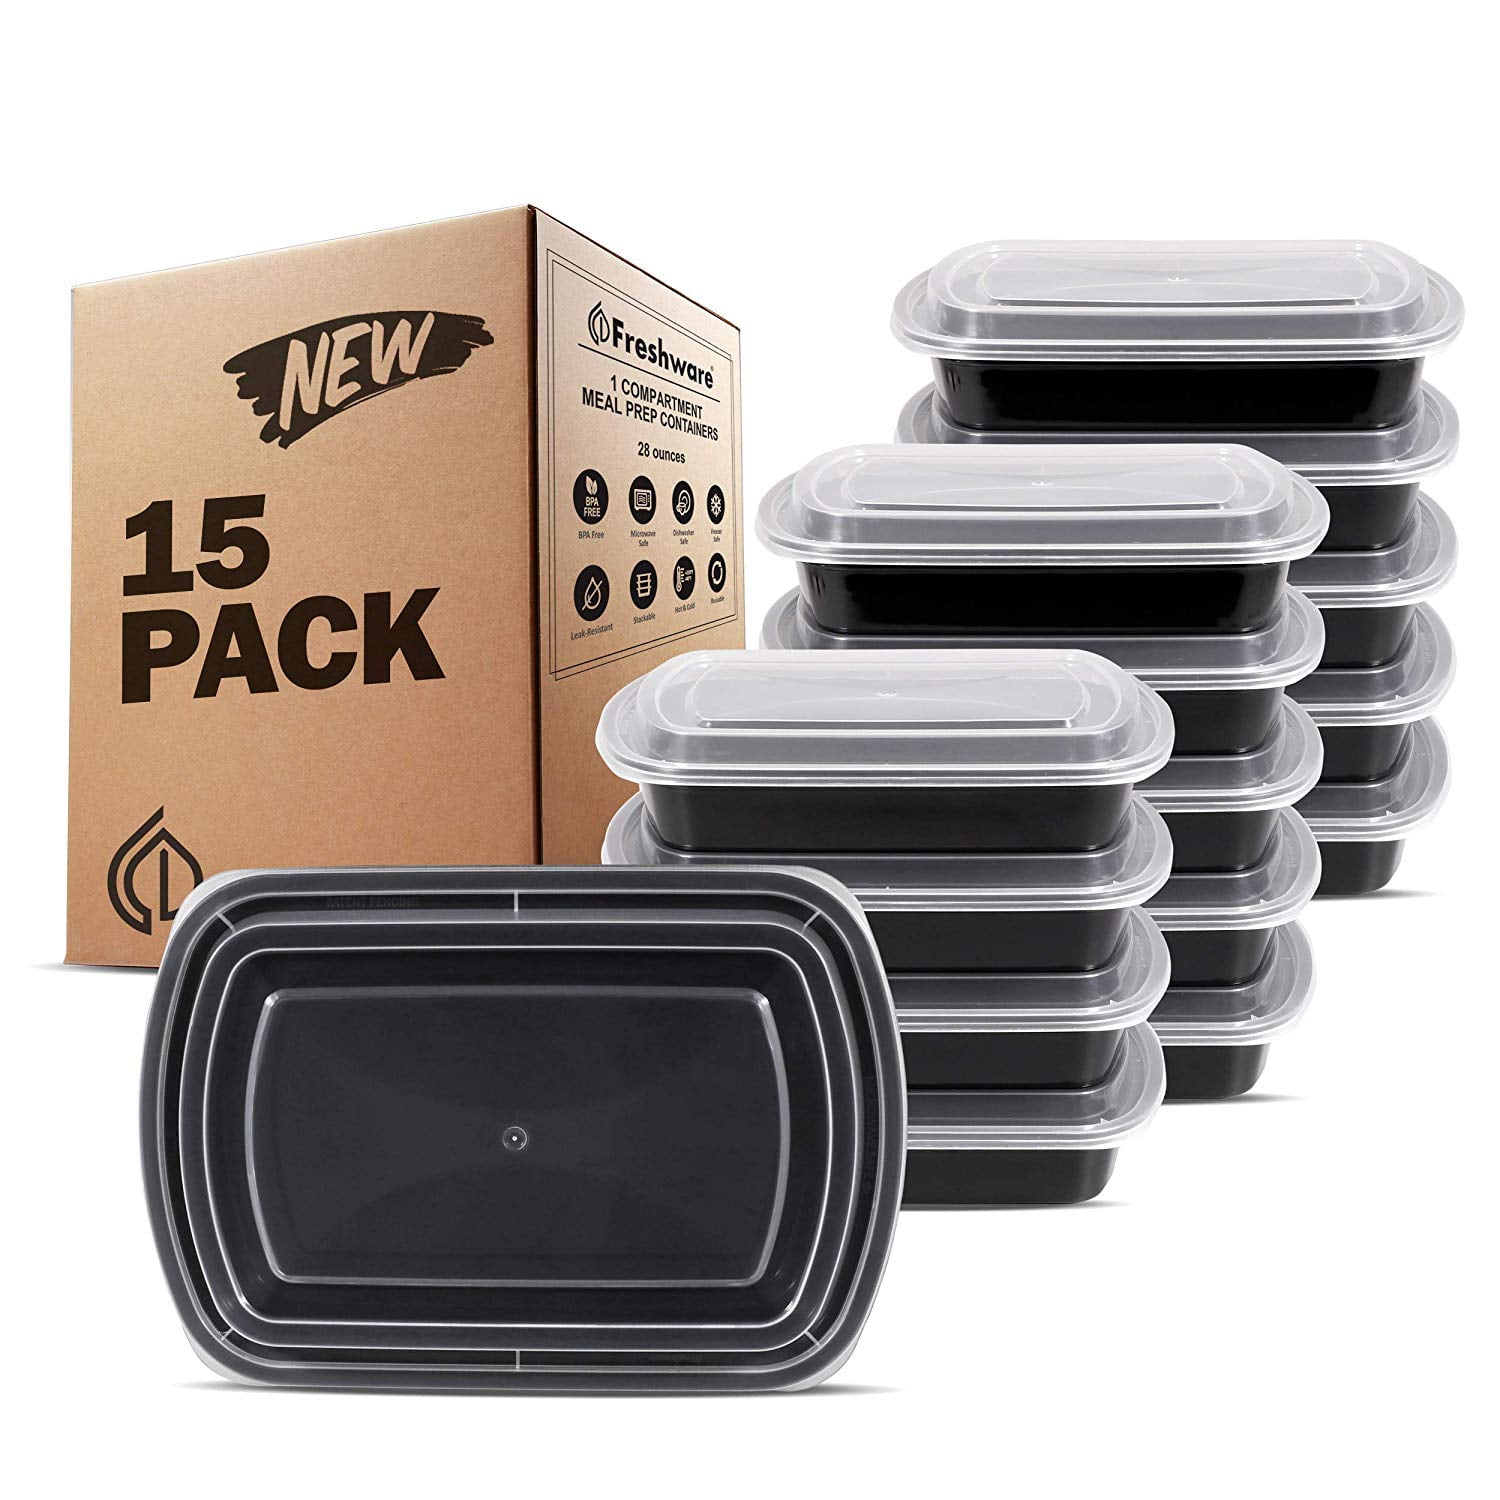 Mezchi 14 Pack Plastic Meal Prep Containers, 33oz Airtight Food Storage  Containers, Reusable Bento Lunch Boxes for Sandwiches, Salad, School, Work